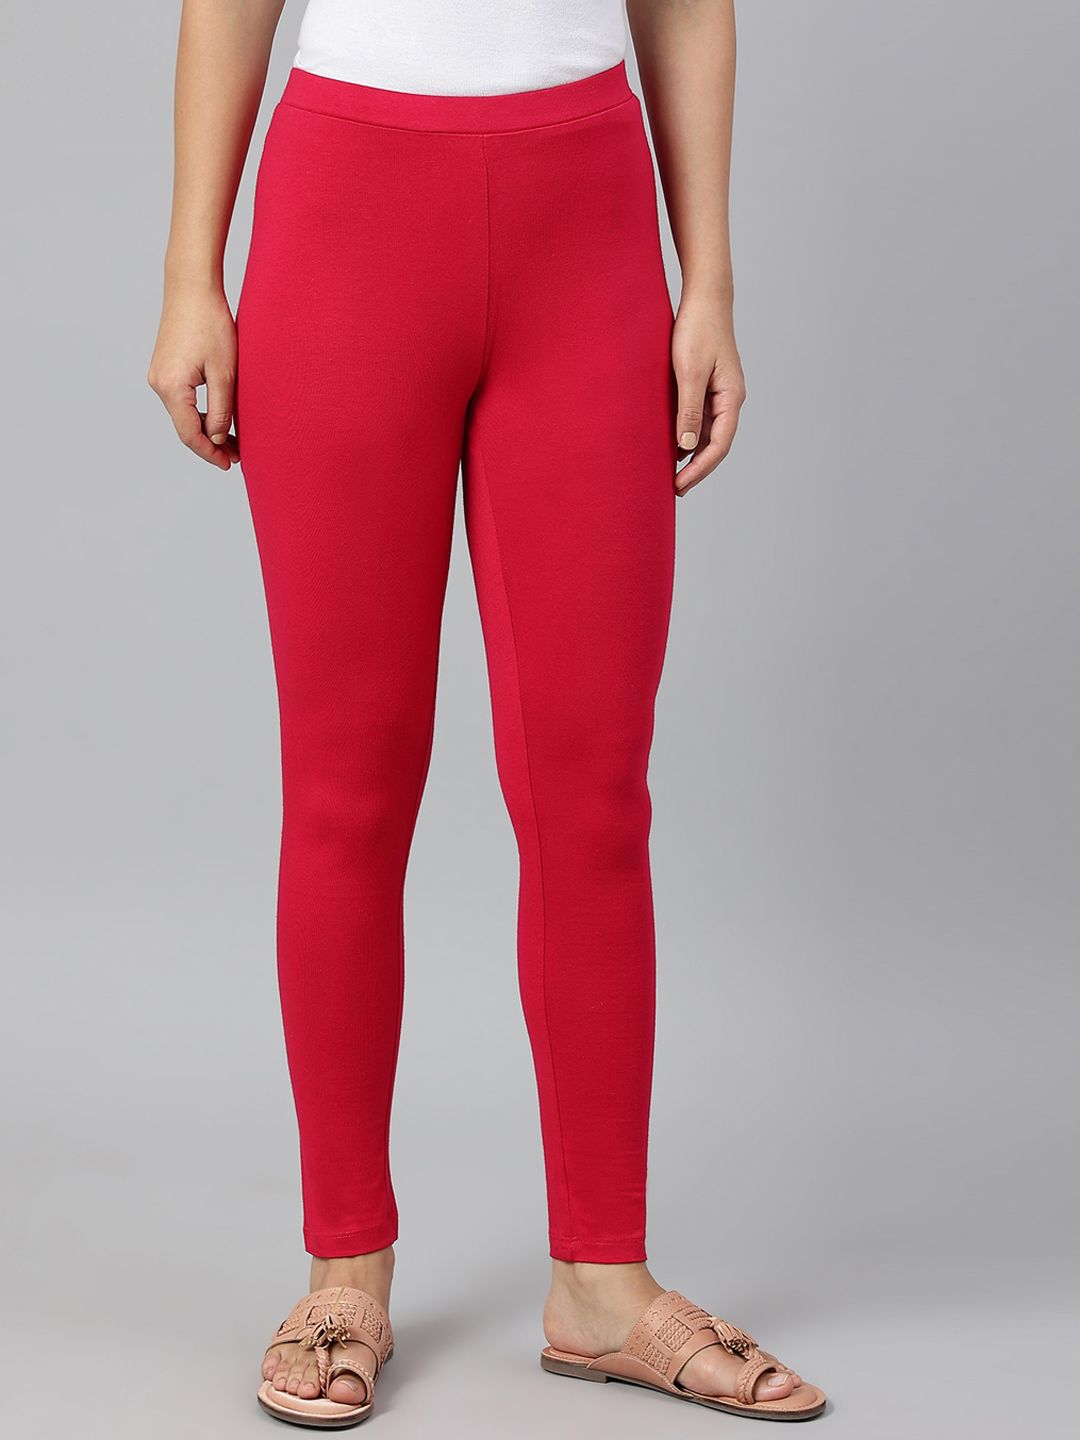 W Women Pink Solid Ankle-Length Leggings Price in India